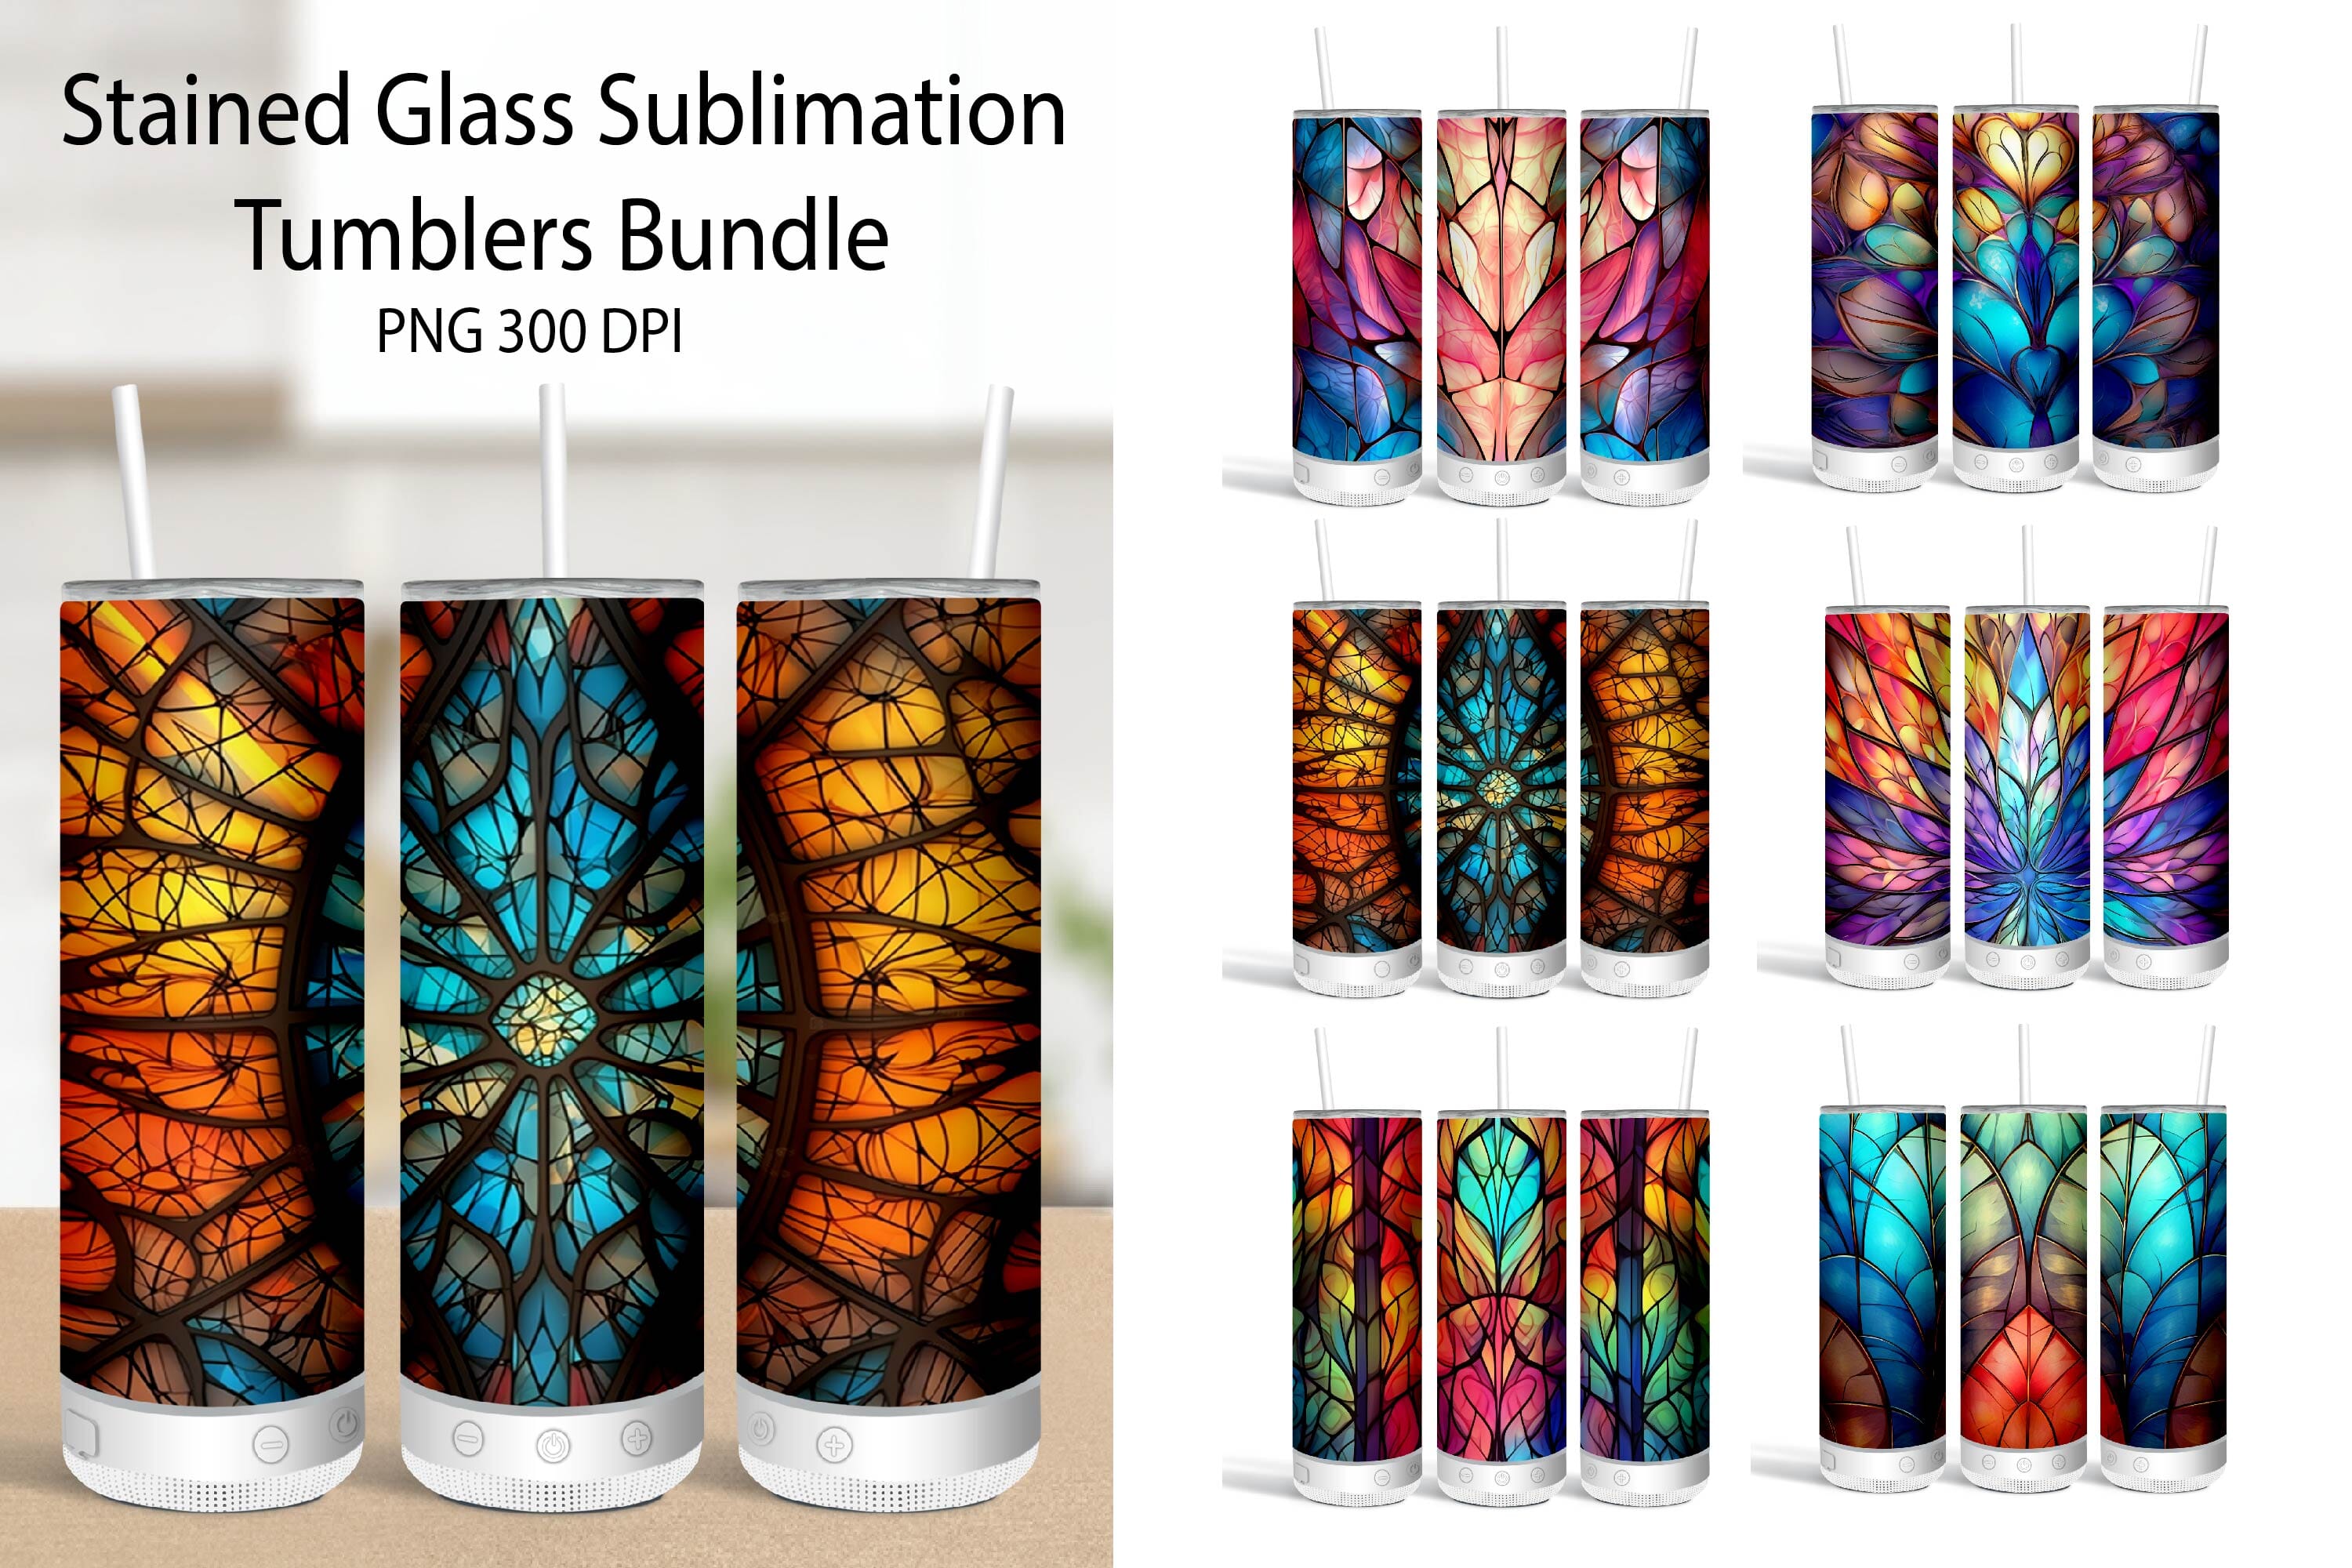 How to Customize Glass Tumblers with Sublimation